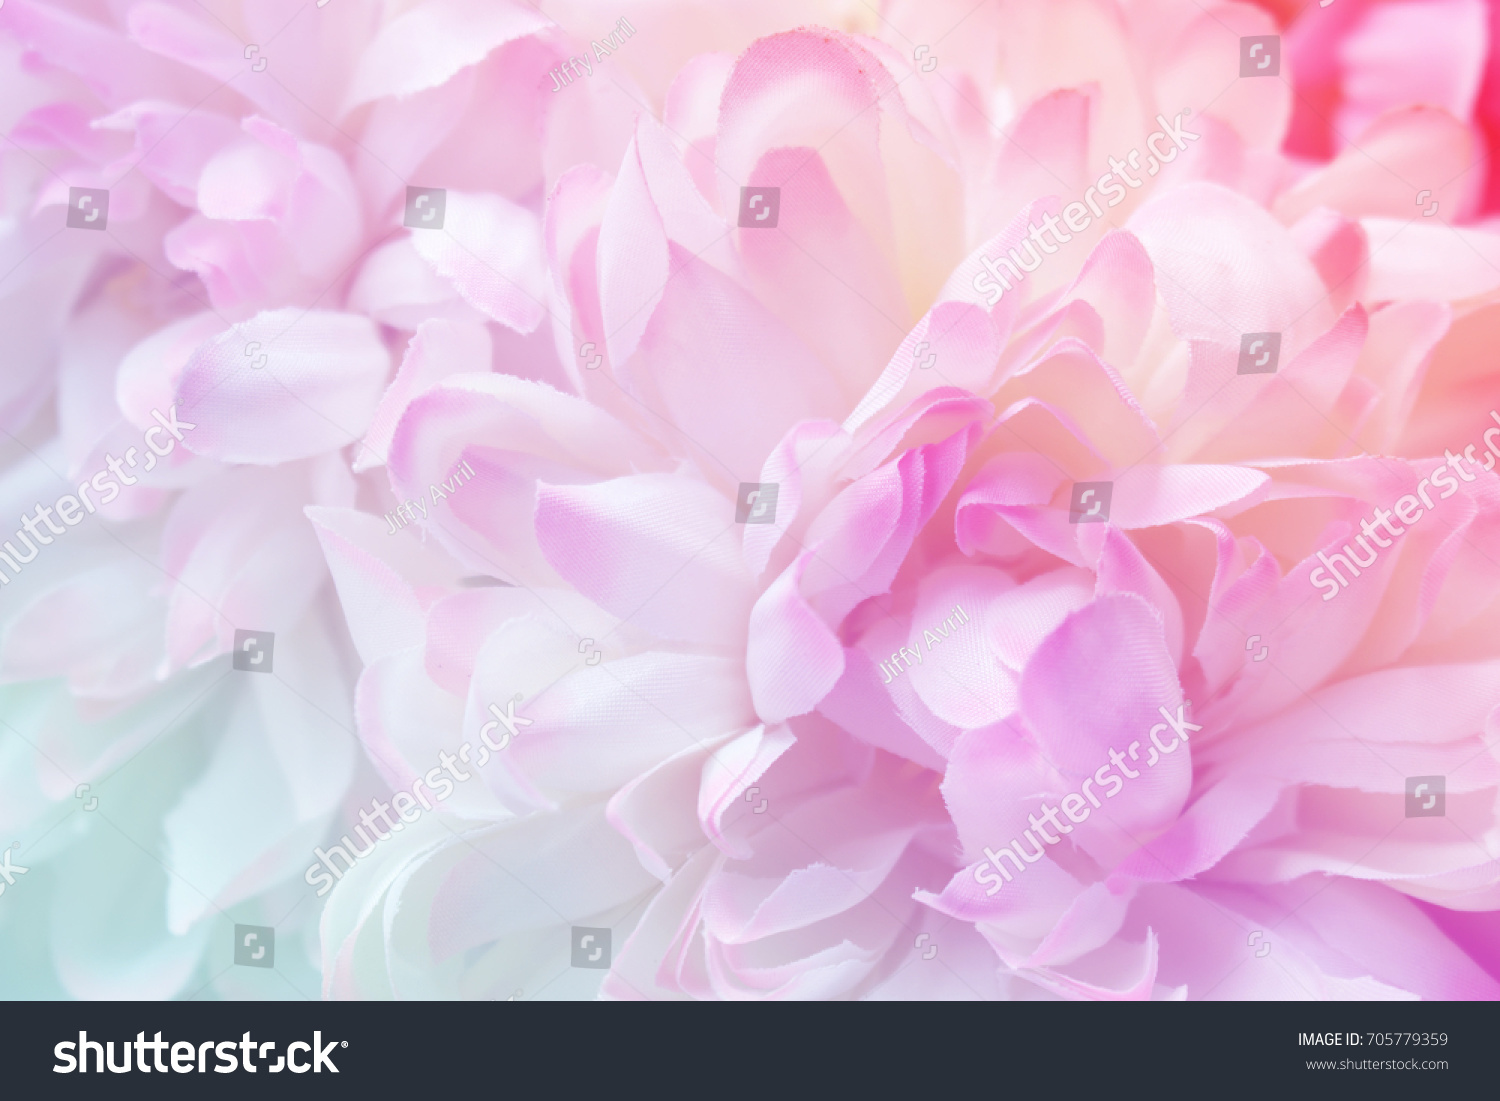 Chrysanthemum flowers in soft pastel color and blur style for background #705779359